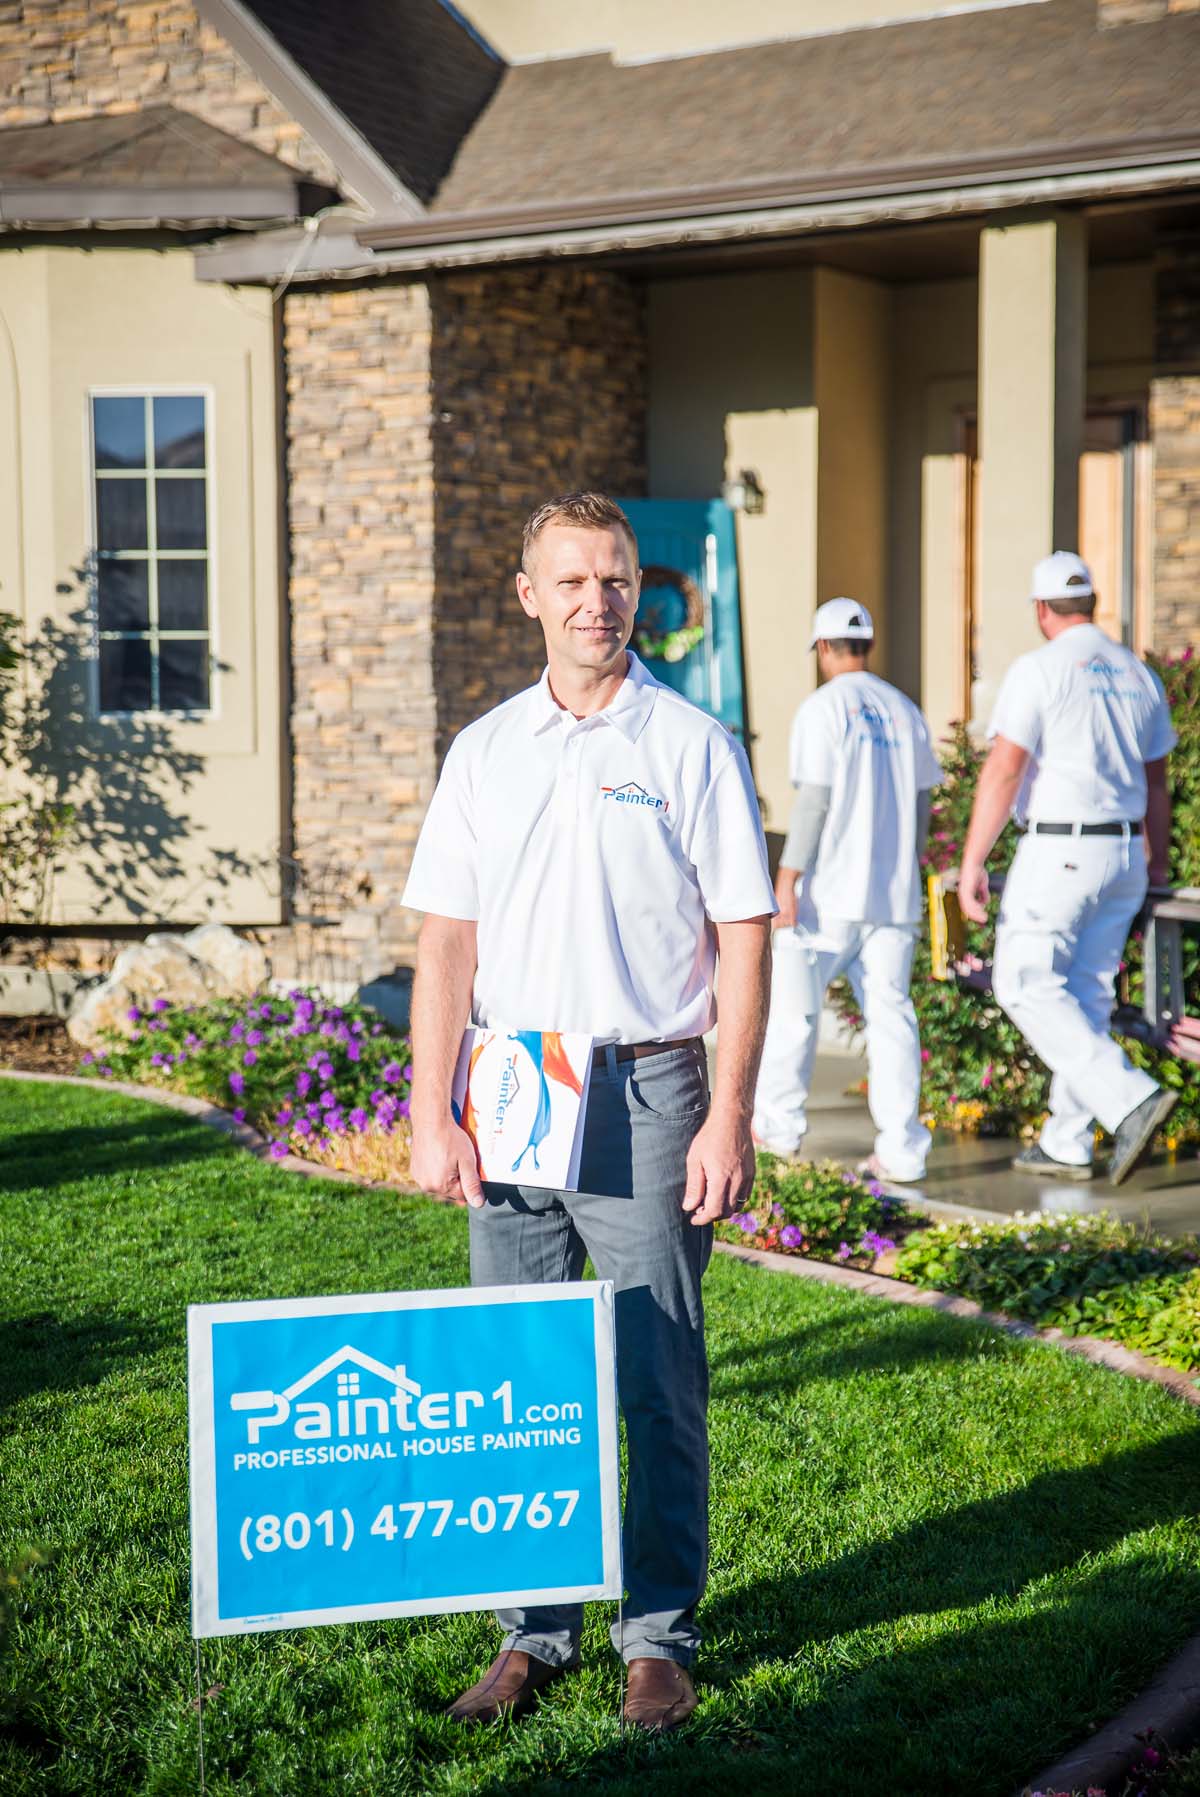 Painter1 is proud to be one of the top rated painting franchise opportunities.